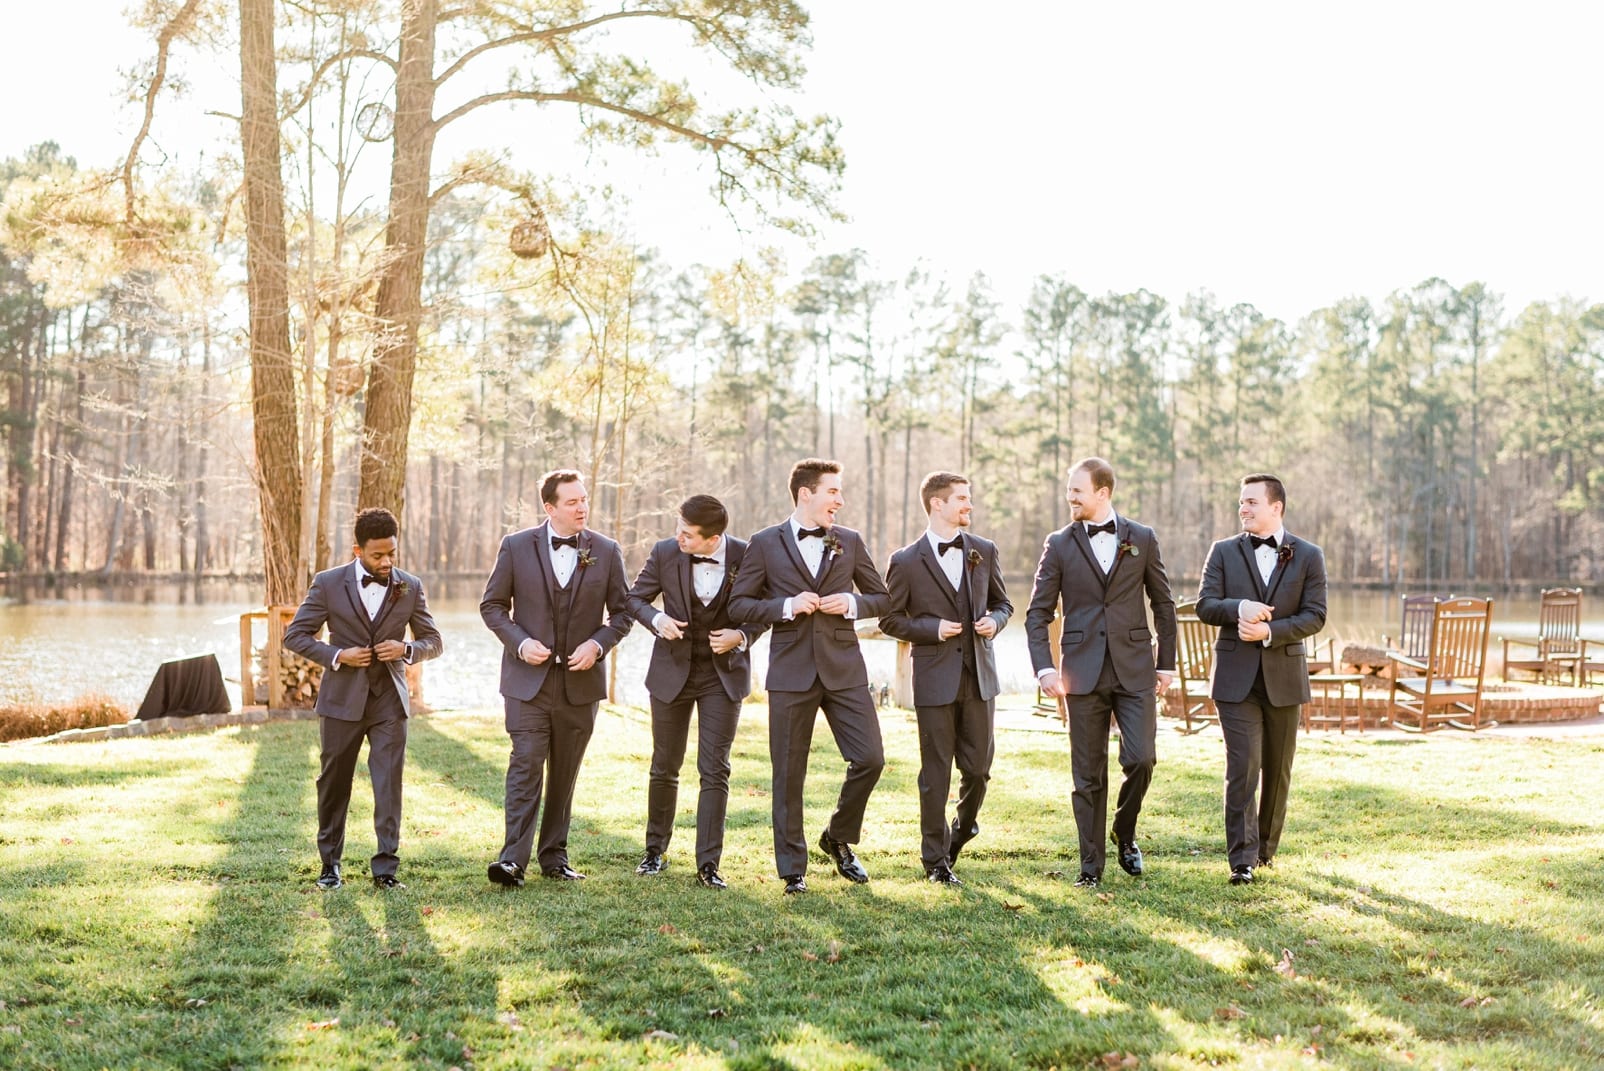 Angus barn groomsmen walking together with the groom while buttoning their jacket photo